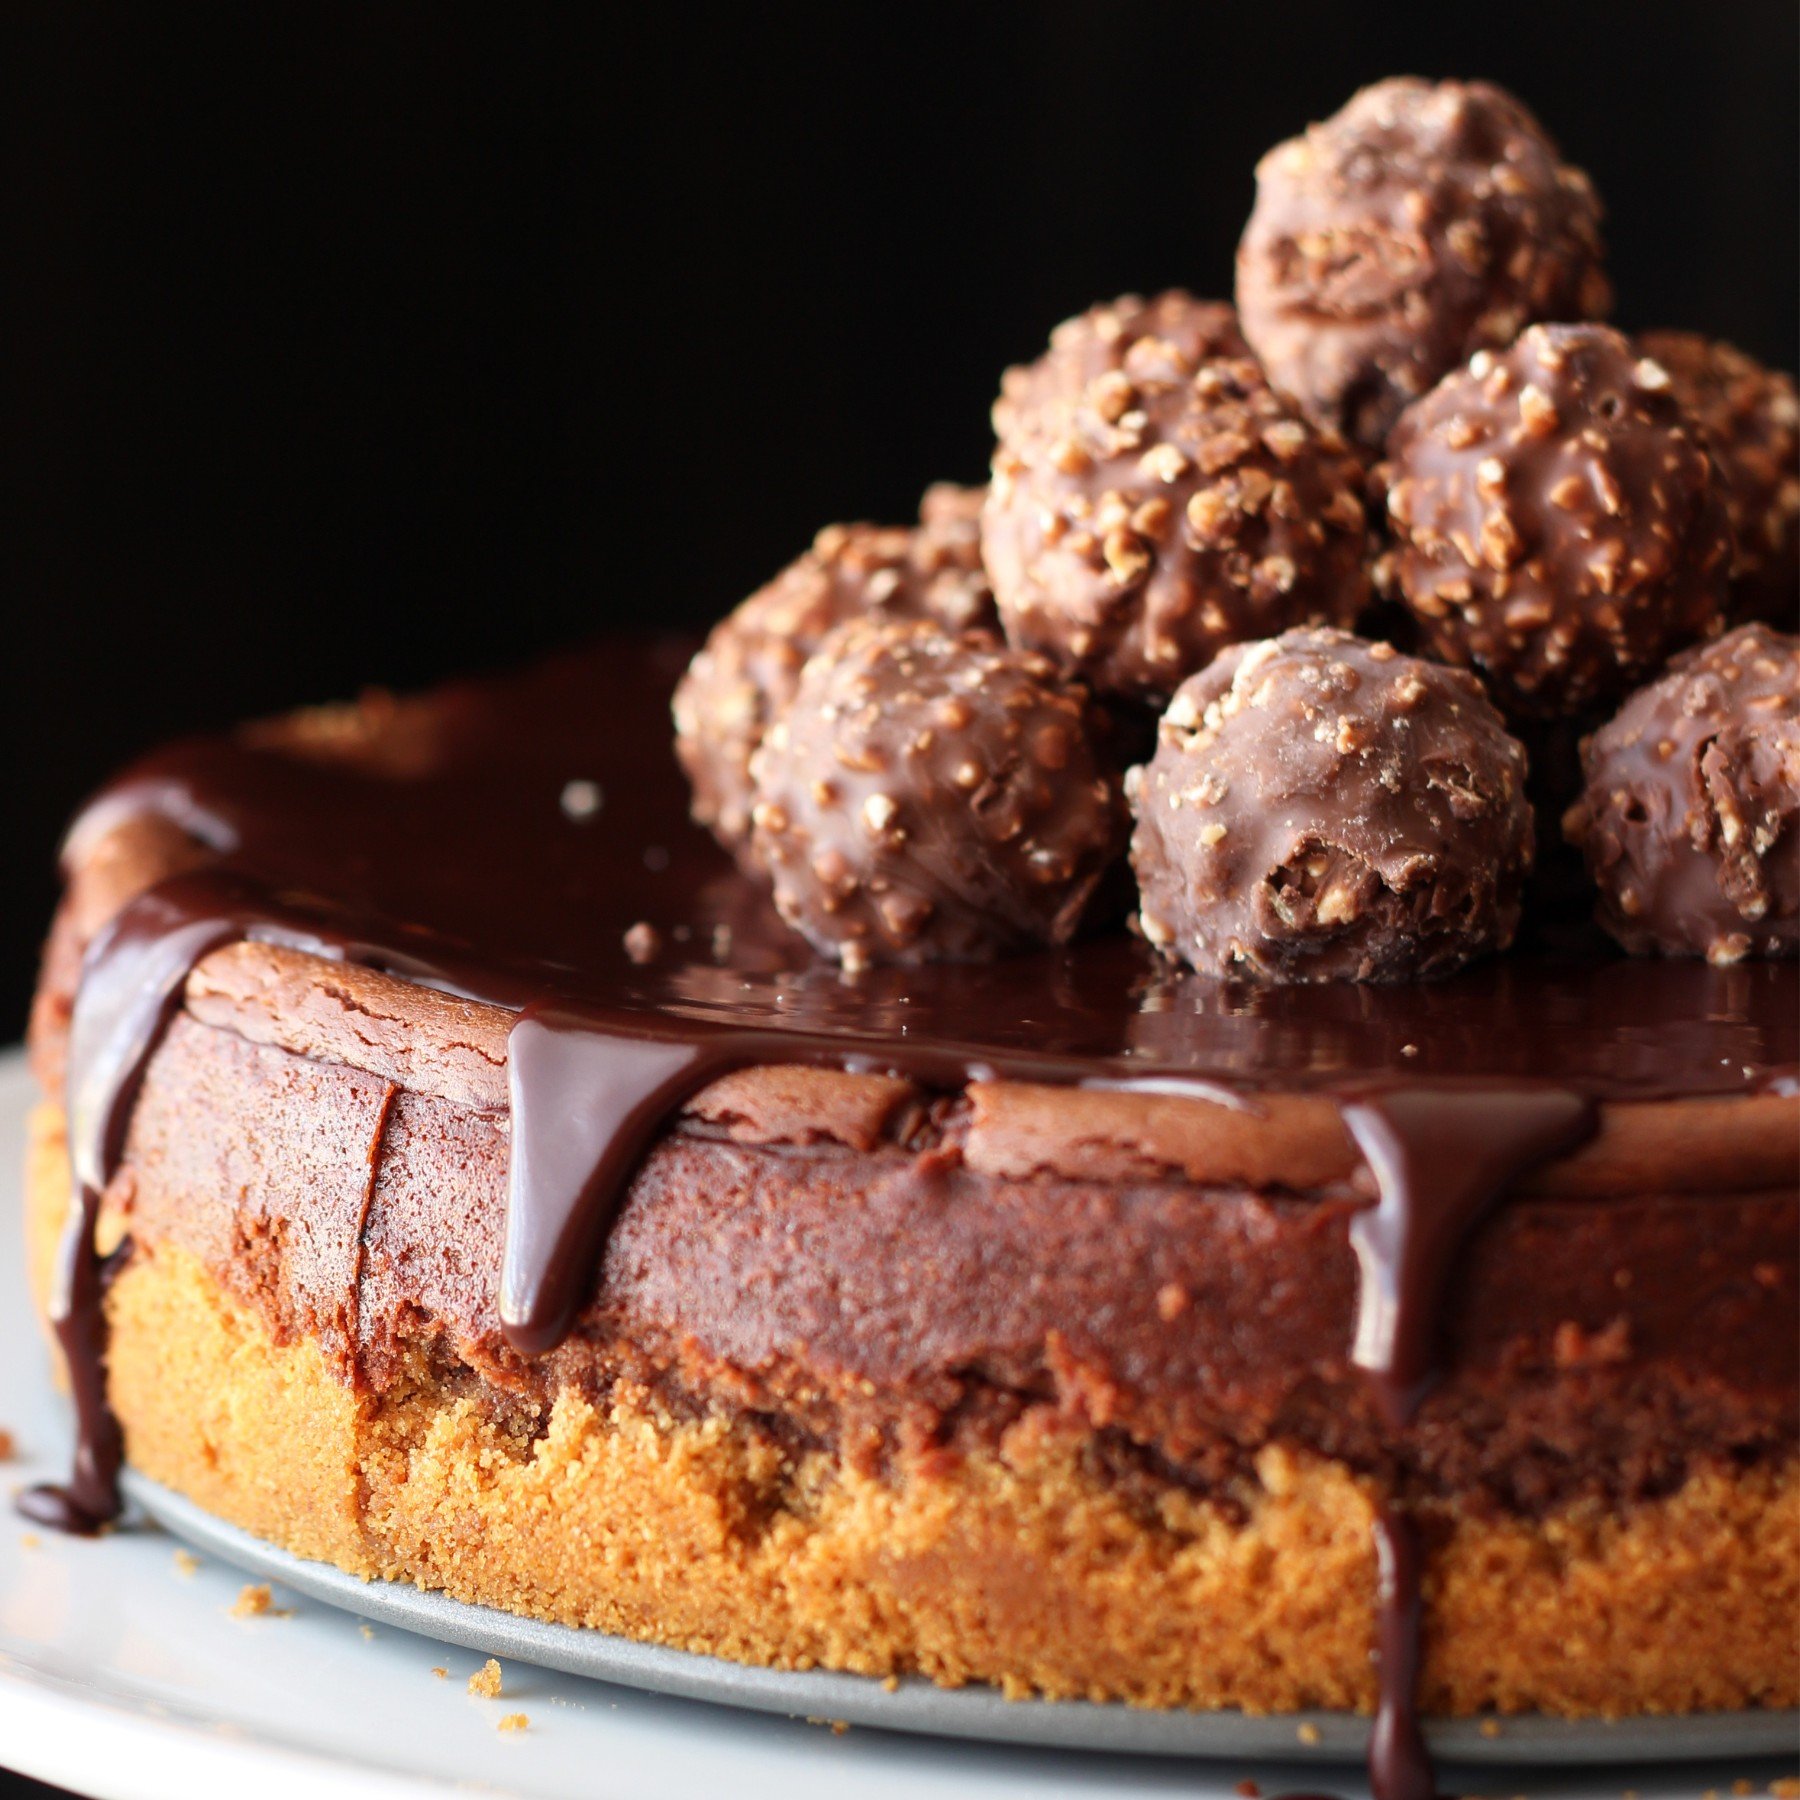 whole unsliced nutella cheesecake, topped with chocolate ganache and finished with a pile of Ferrero Rocher candies.